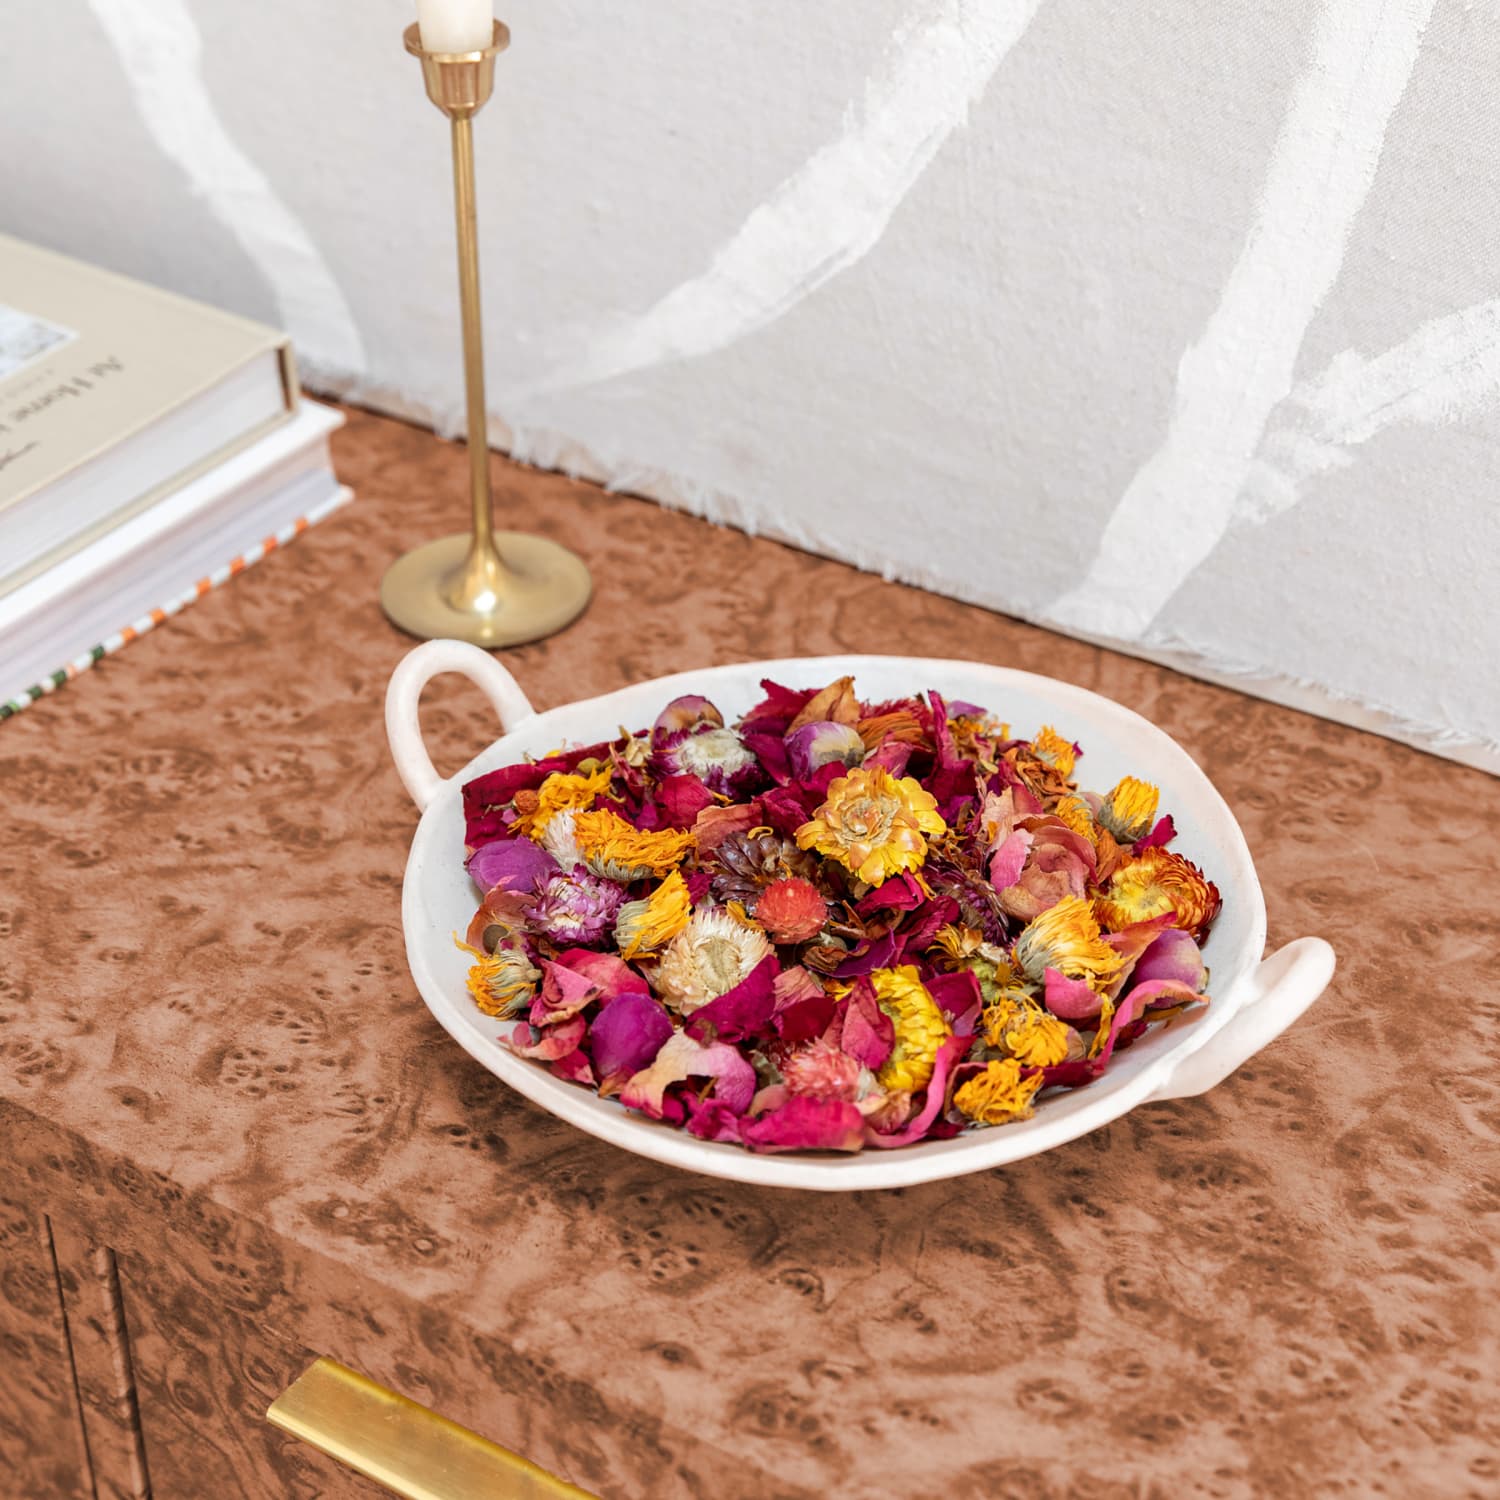 How to Make Potpourri: 5 Simple Steps